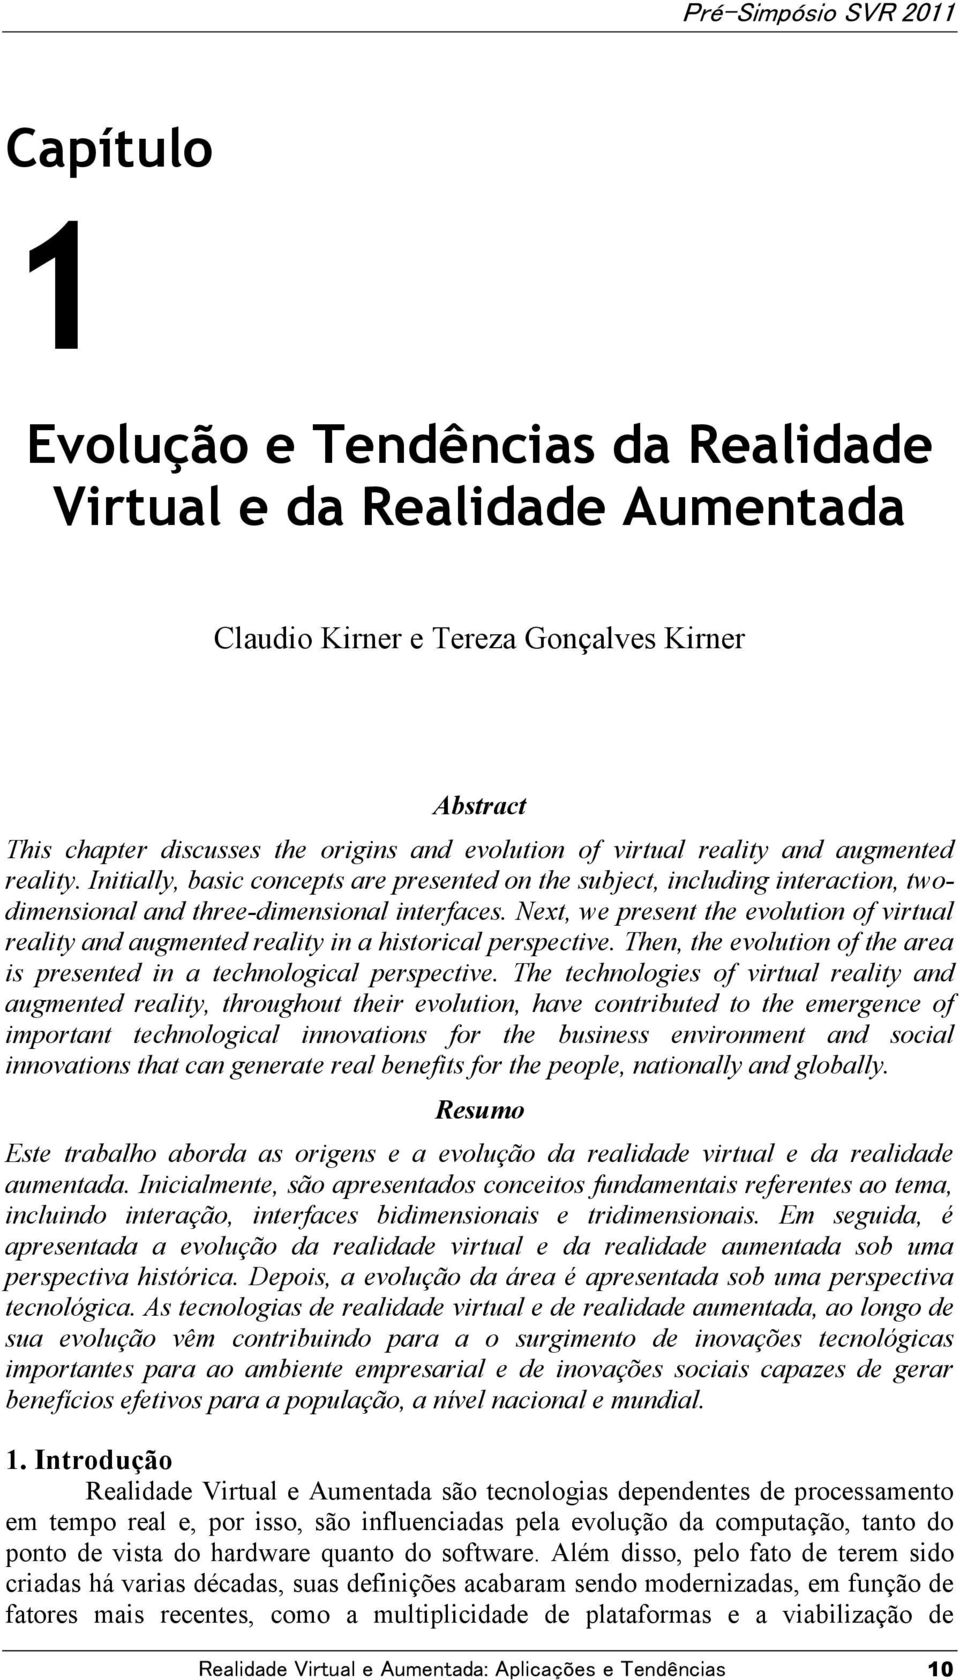 Next, we present the evolution of virtual reality and augmented reality in a historical perspective. Then, the evolution of the area is presented in a technological perspective.